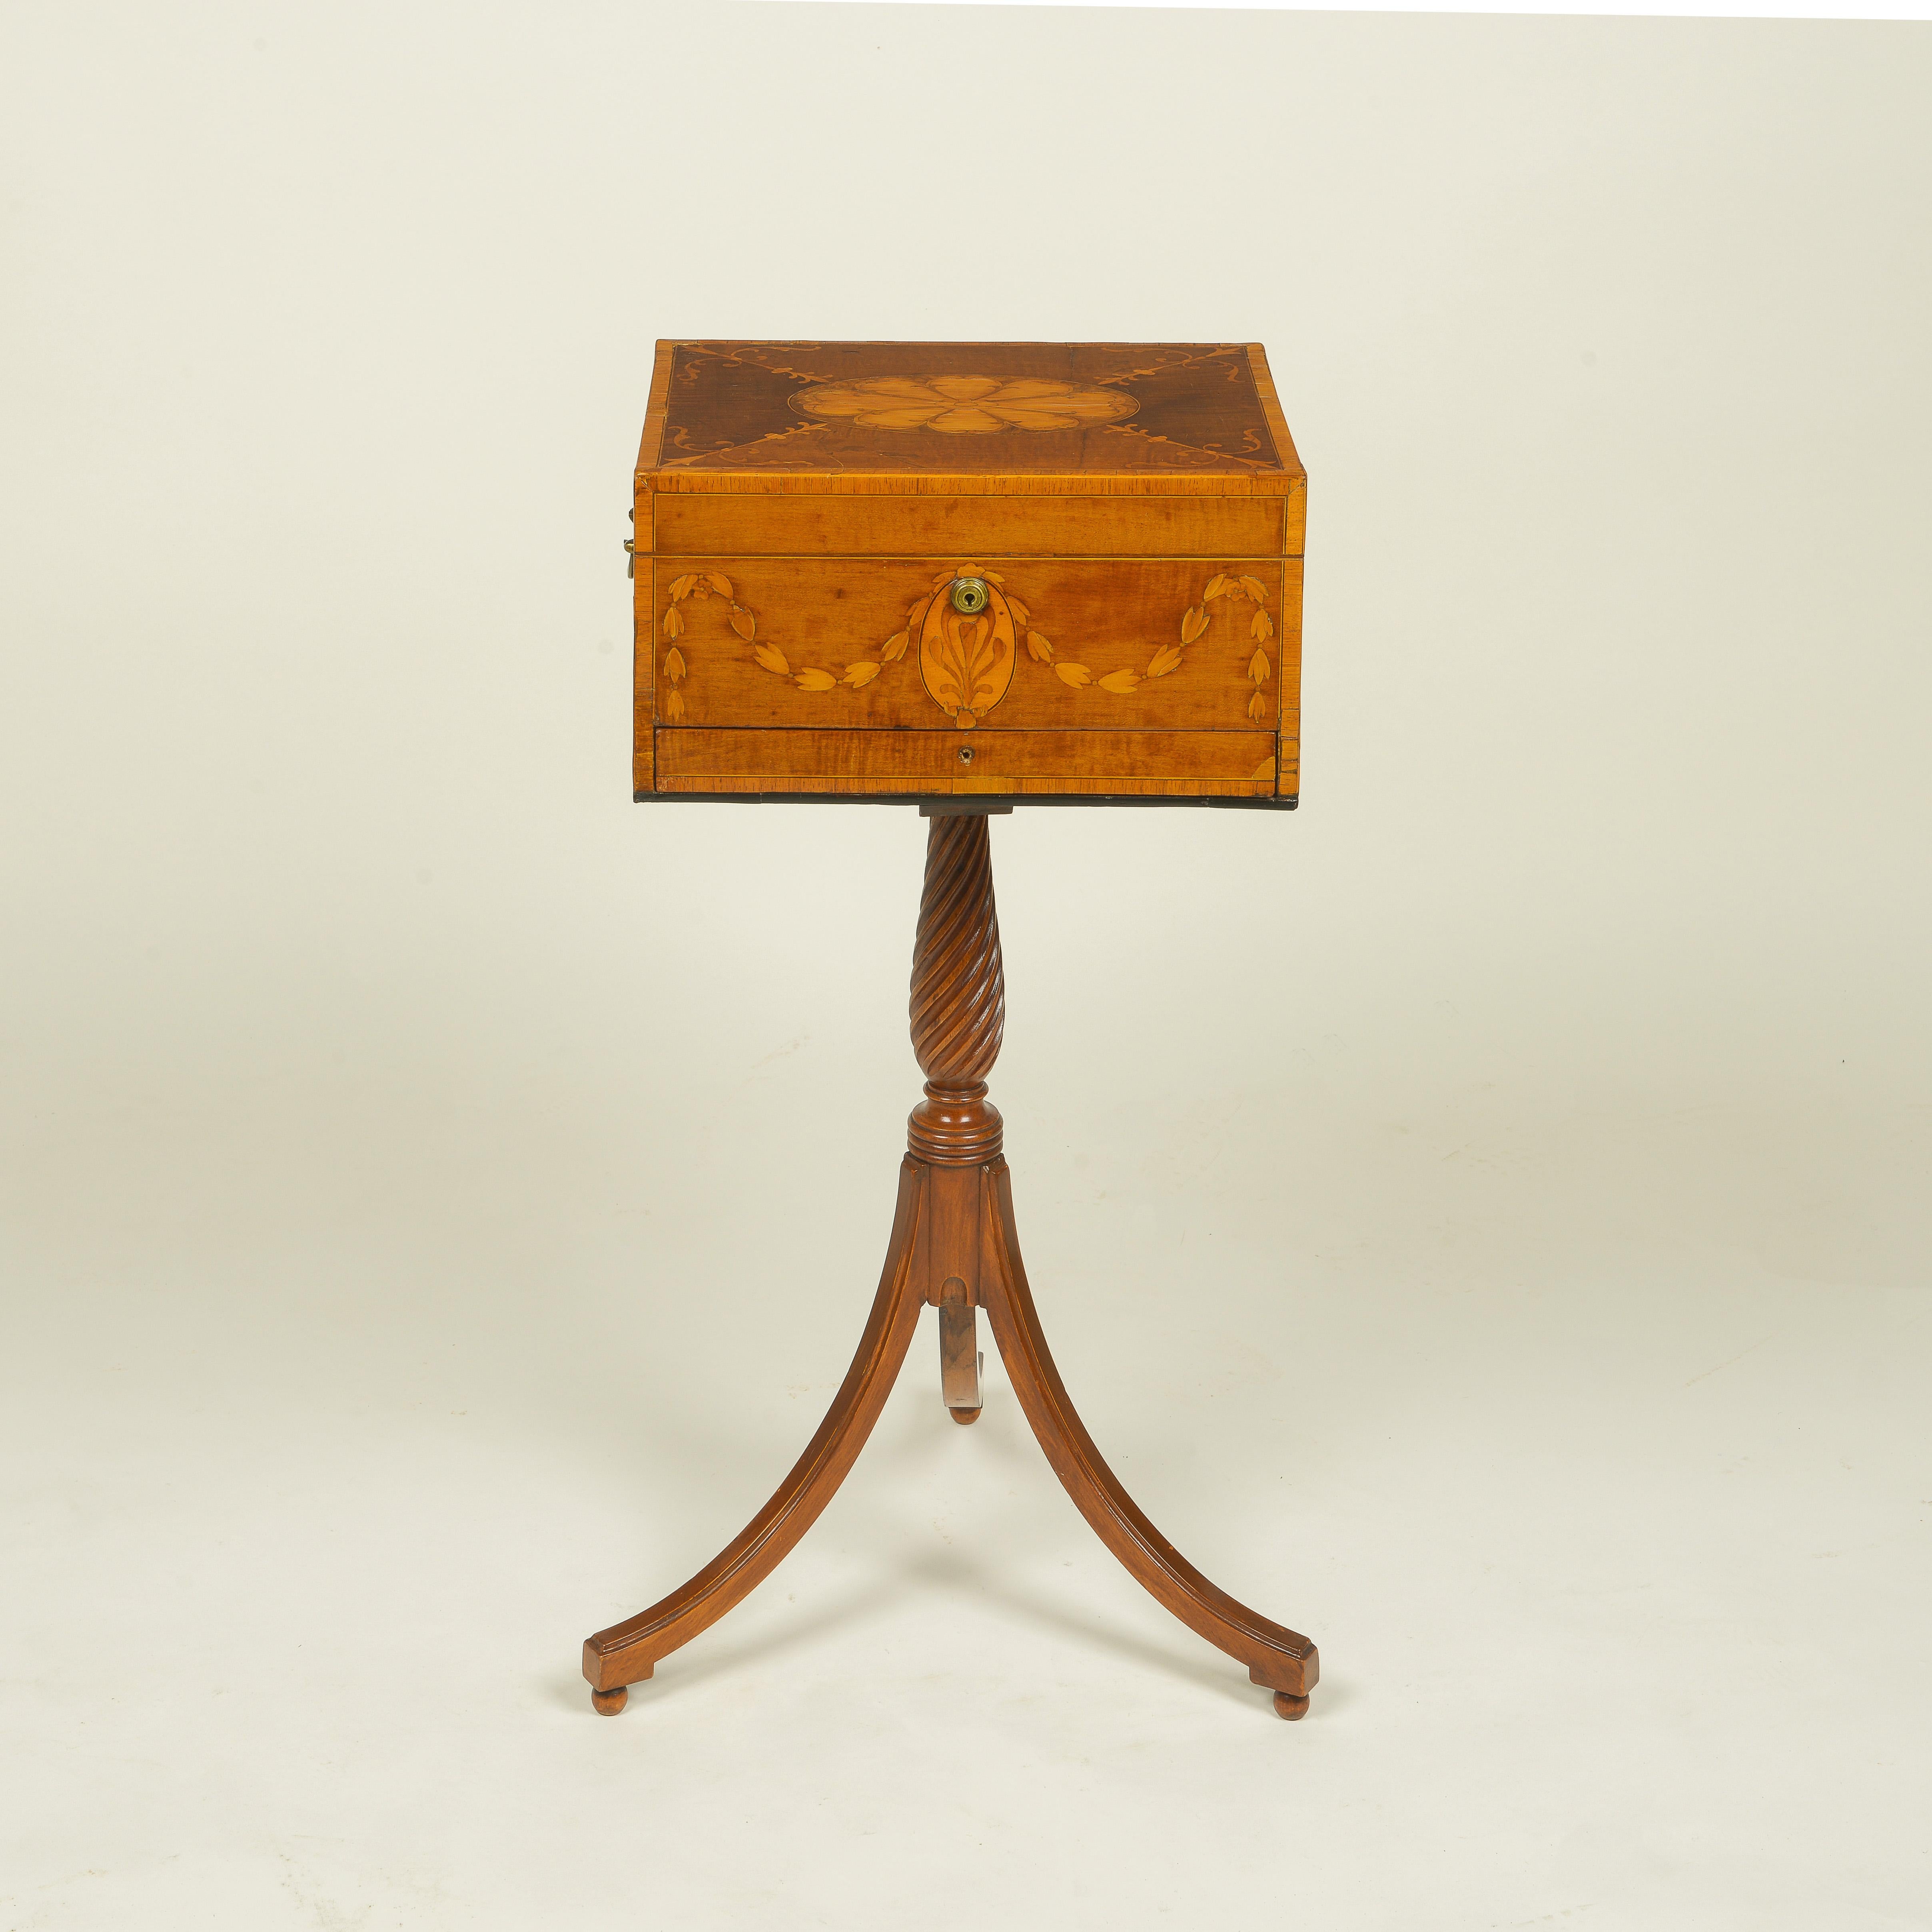 The table top in the form of a rectangular box finely inlaid with an oval flowerhead centered by bellflower spray spandrels; the sides inlaid with bellflower garlands and brass carrying handles to the sides; raised on a spiral-fluted columnar